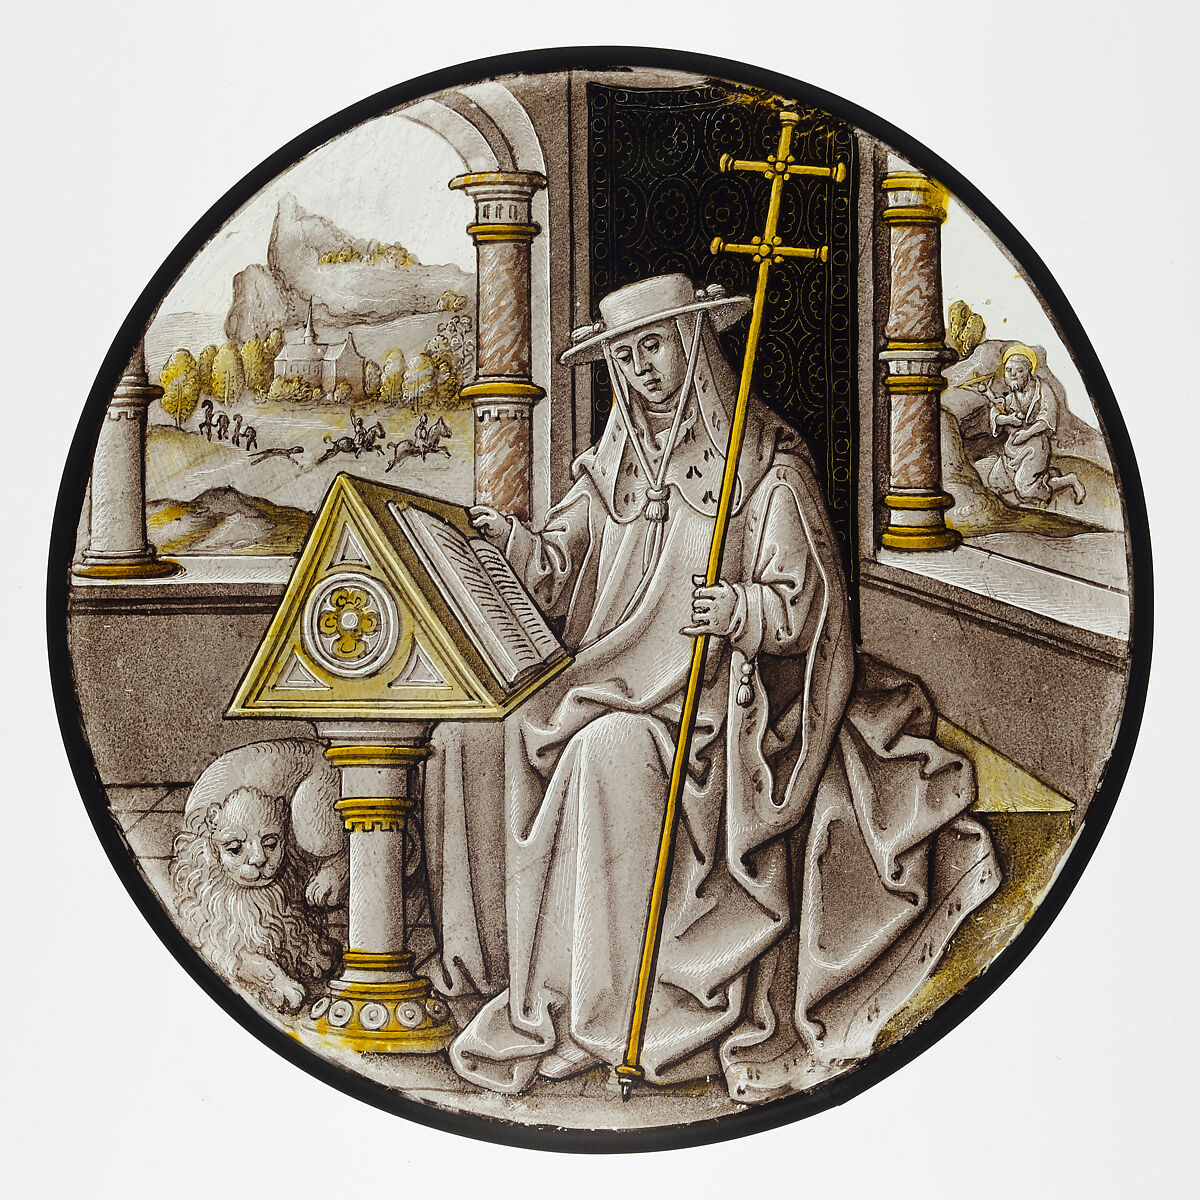 Roundel with Saint Jerome in his Study, Based on a design by Pseudo-Ortkens (South Netherlandish, active Antwerp and Brussels, ca. 1500–30), Colorless glass, vitreous paint and silver stain, South Netherlandish 